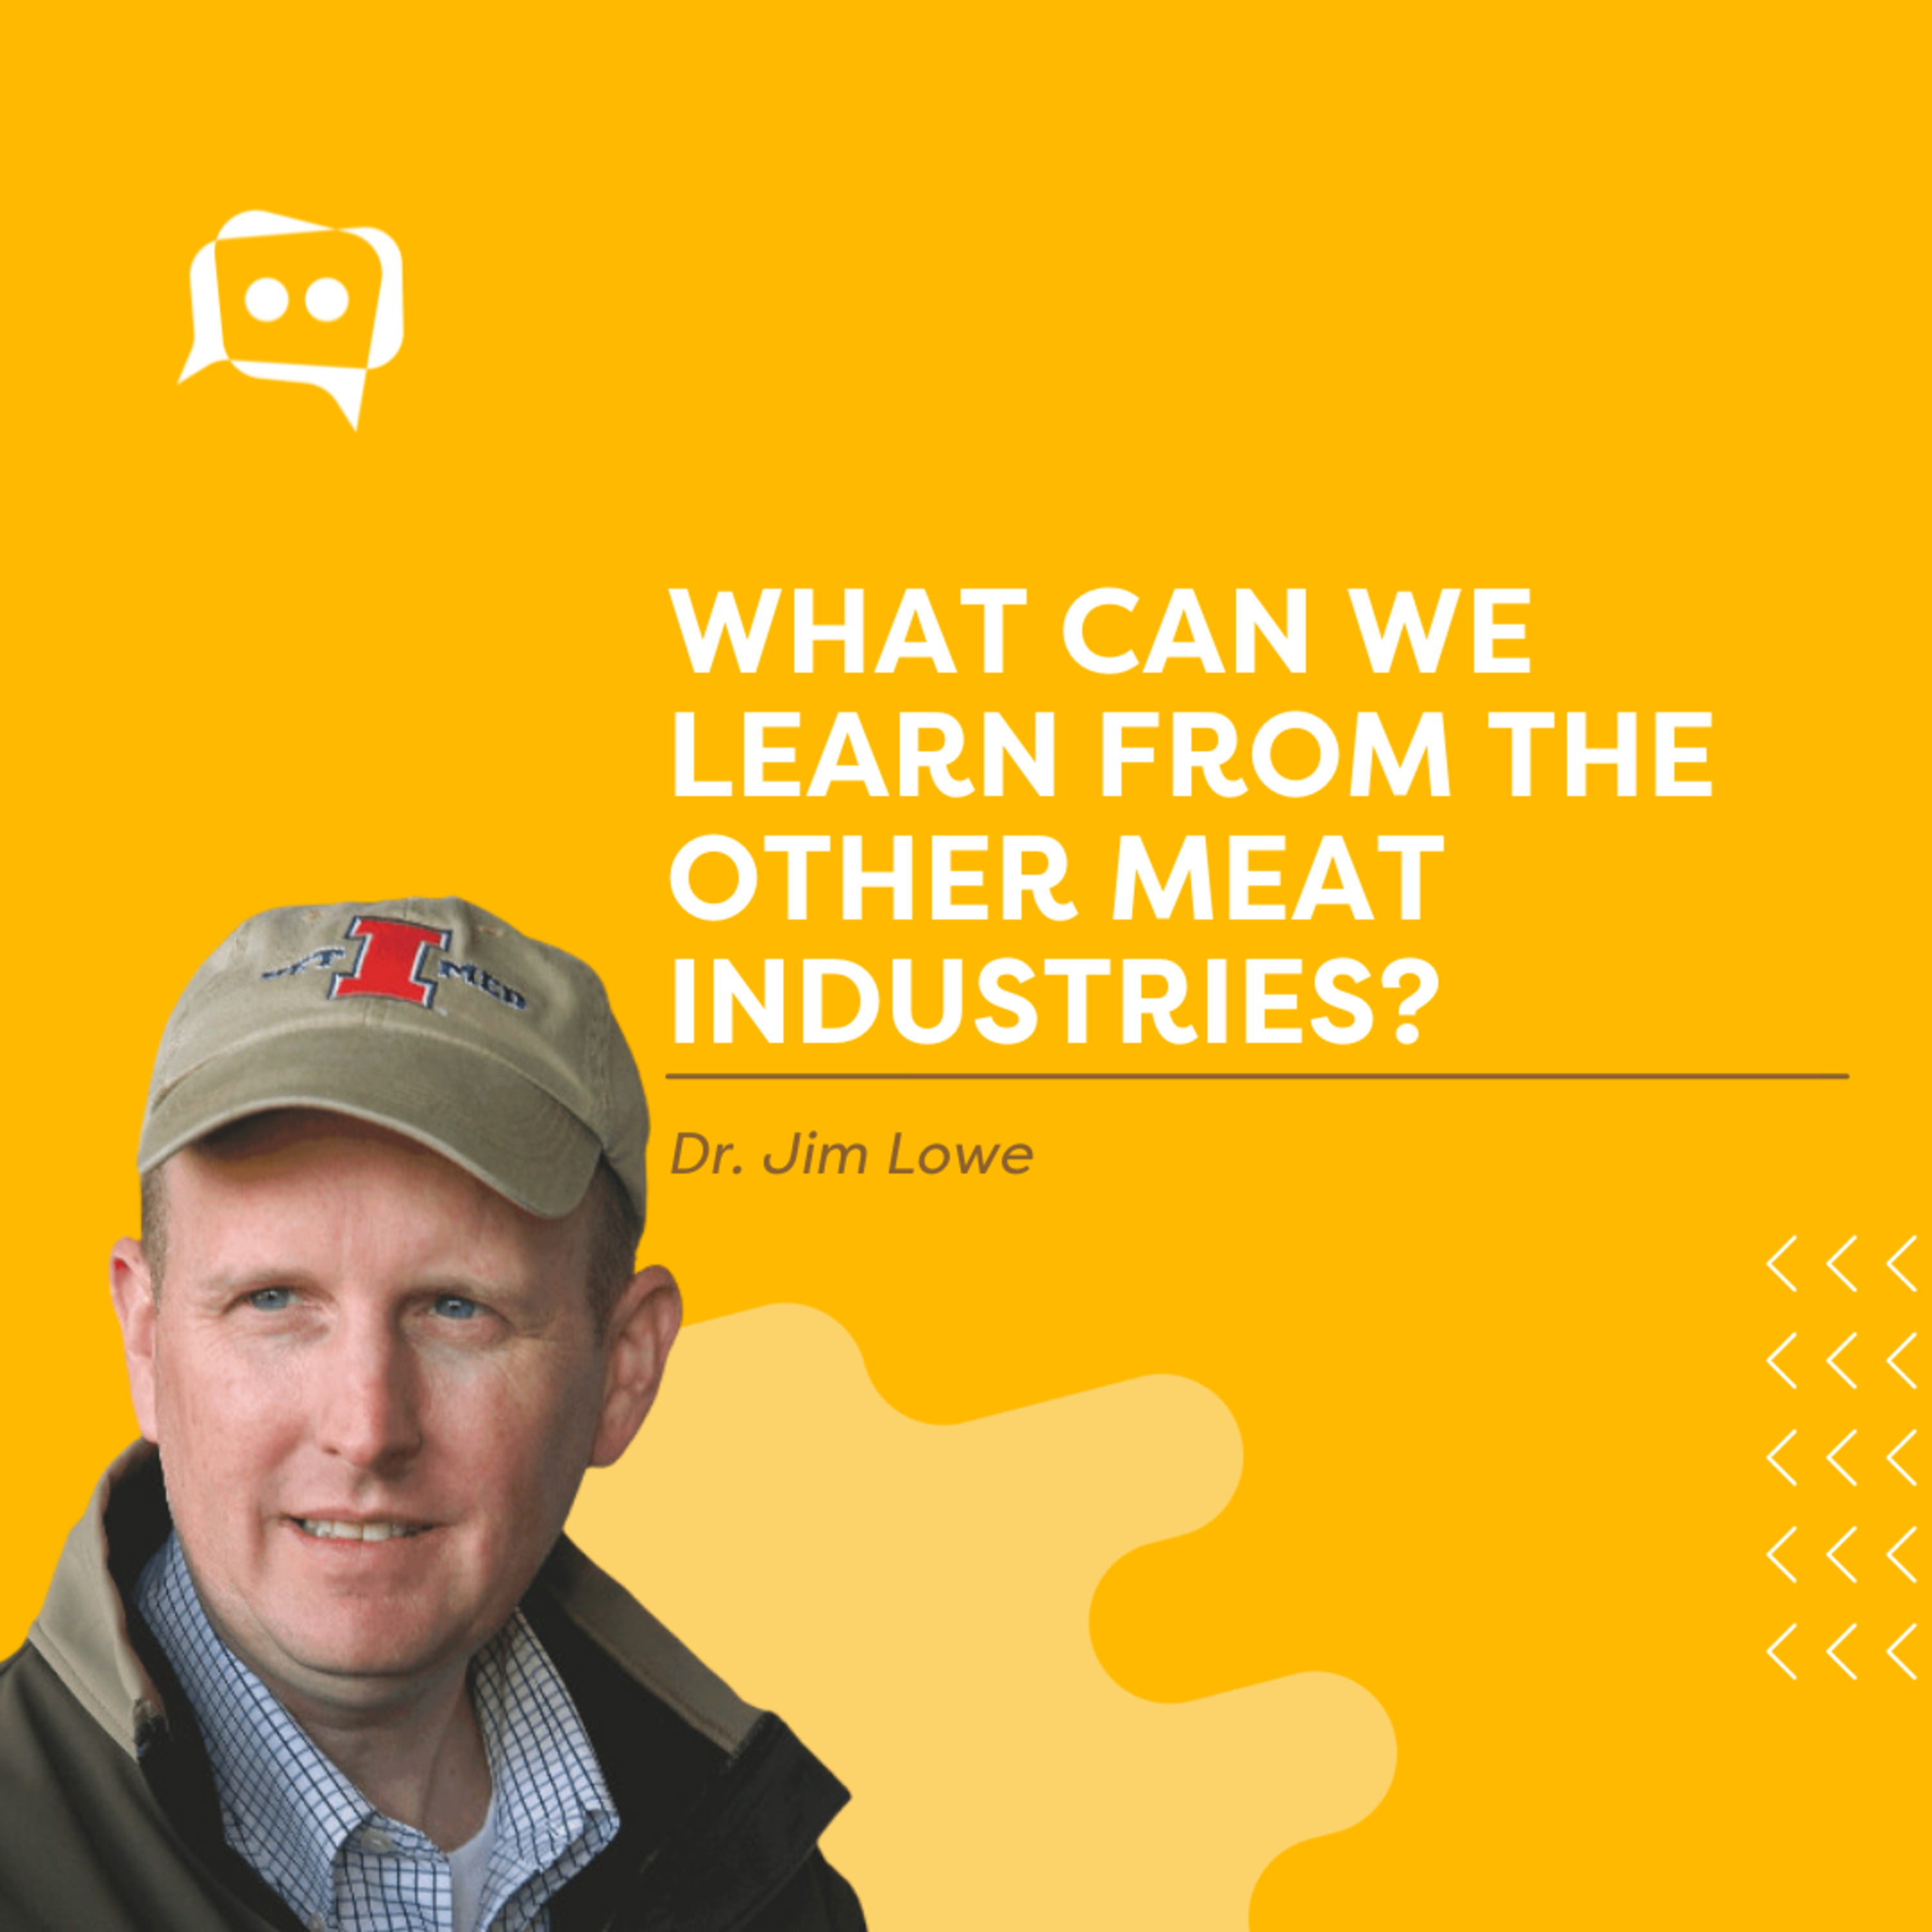 #SHORTS: What can we learn from the other meat industries? With Dr. Jim Lowe